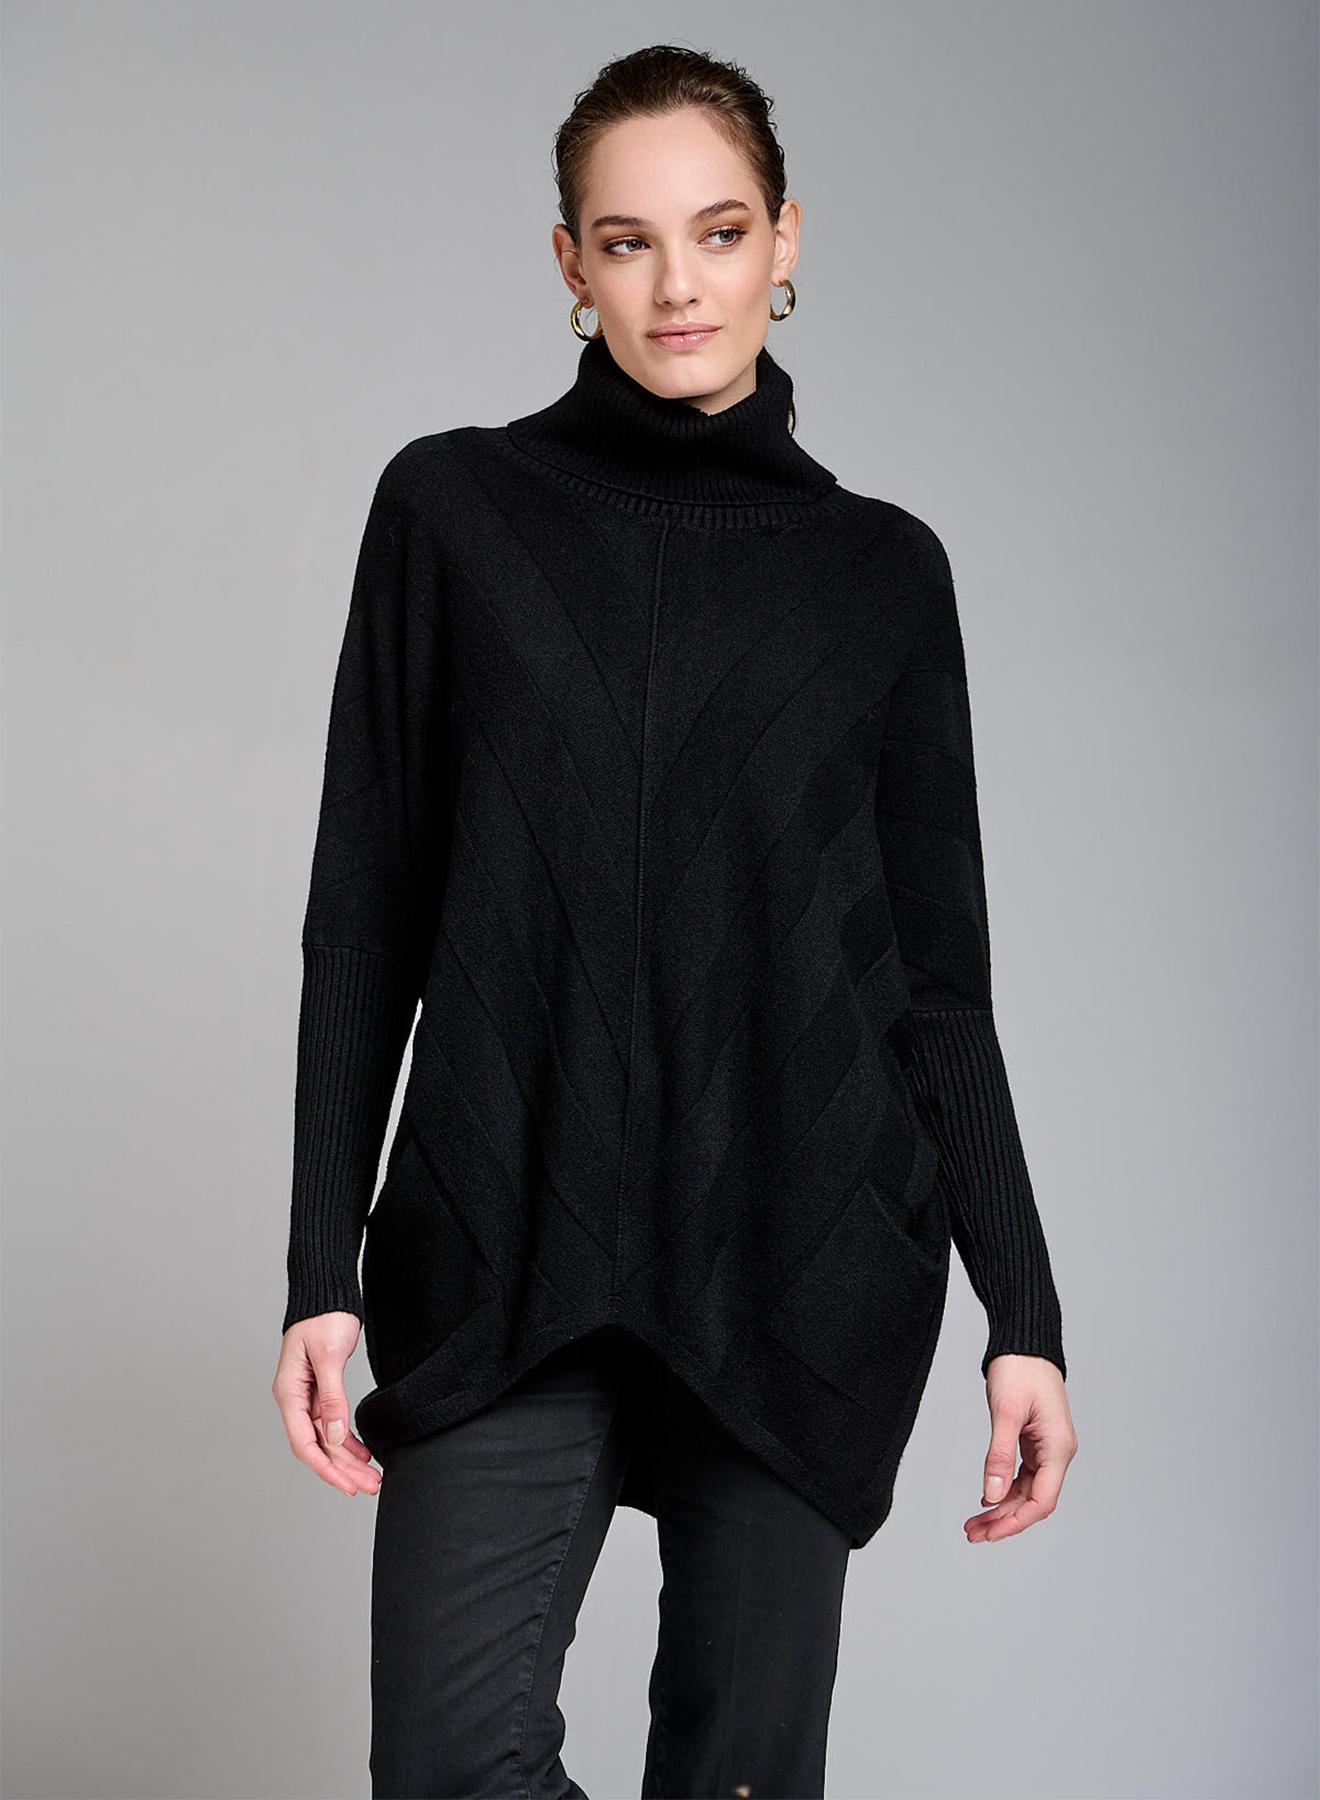 Oversized turtleneck sweater with textured details and pockets - 4